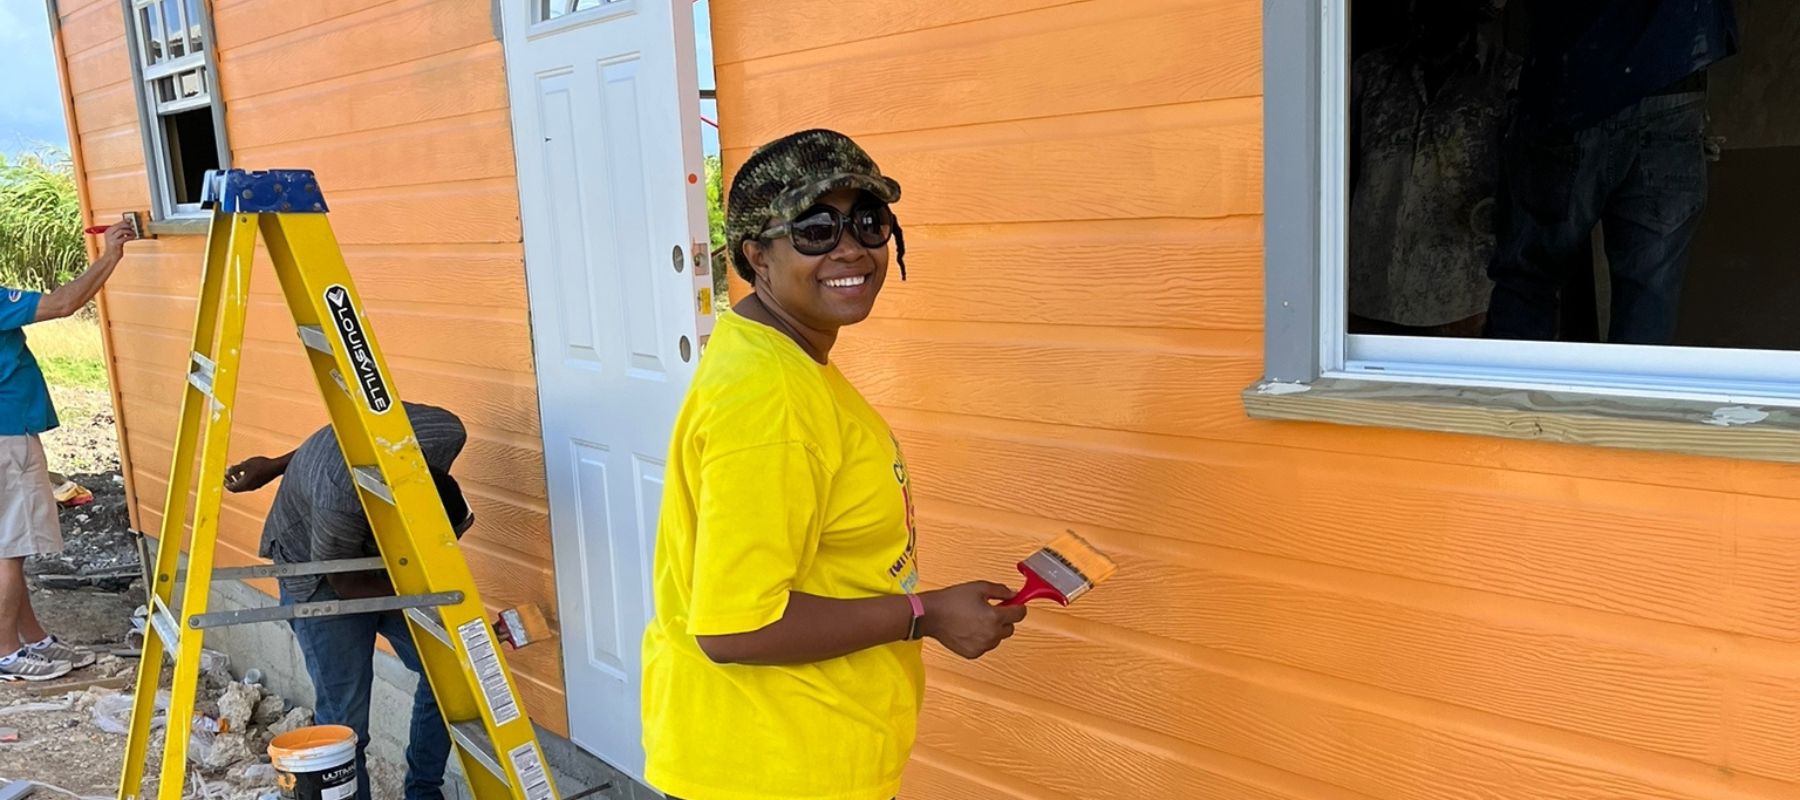 Financing and hire purchase arrangements will make home improvements more affordable and facilitate home repainting in locations around the Caribbean.